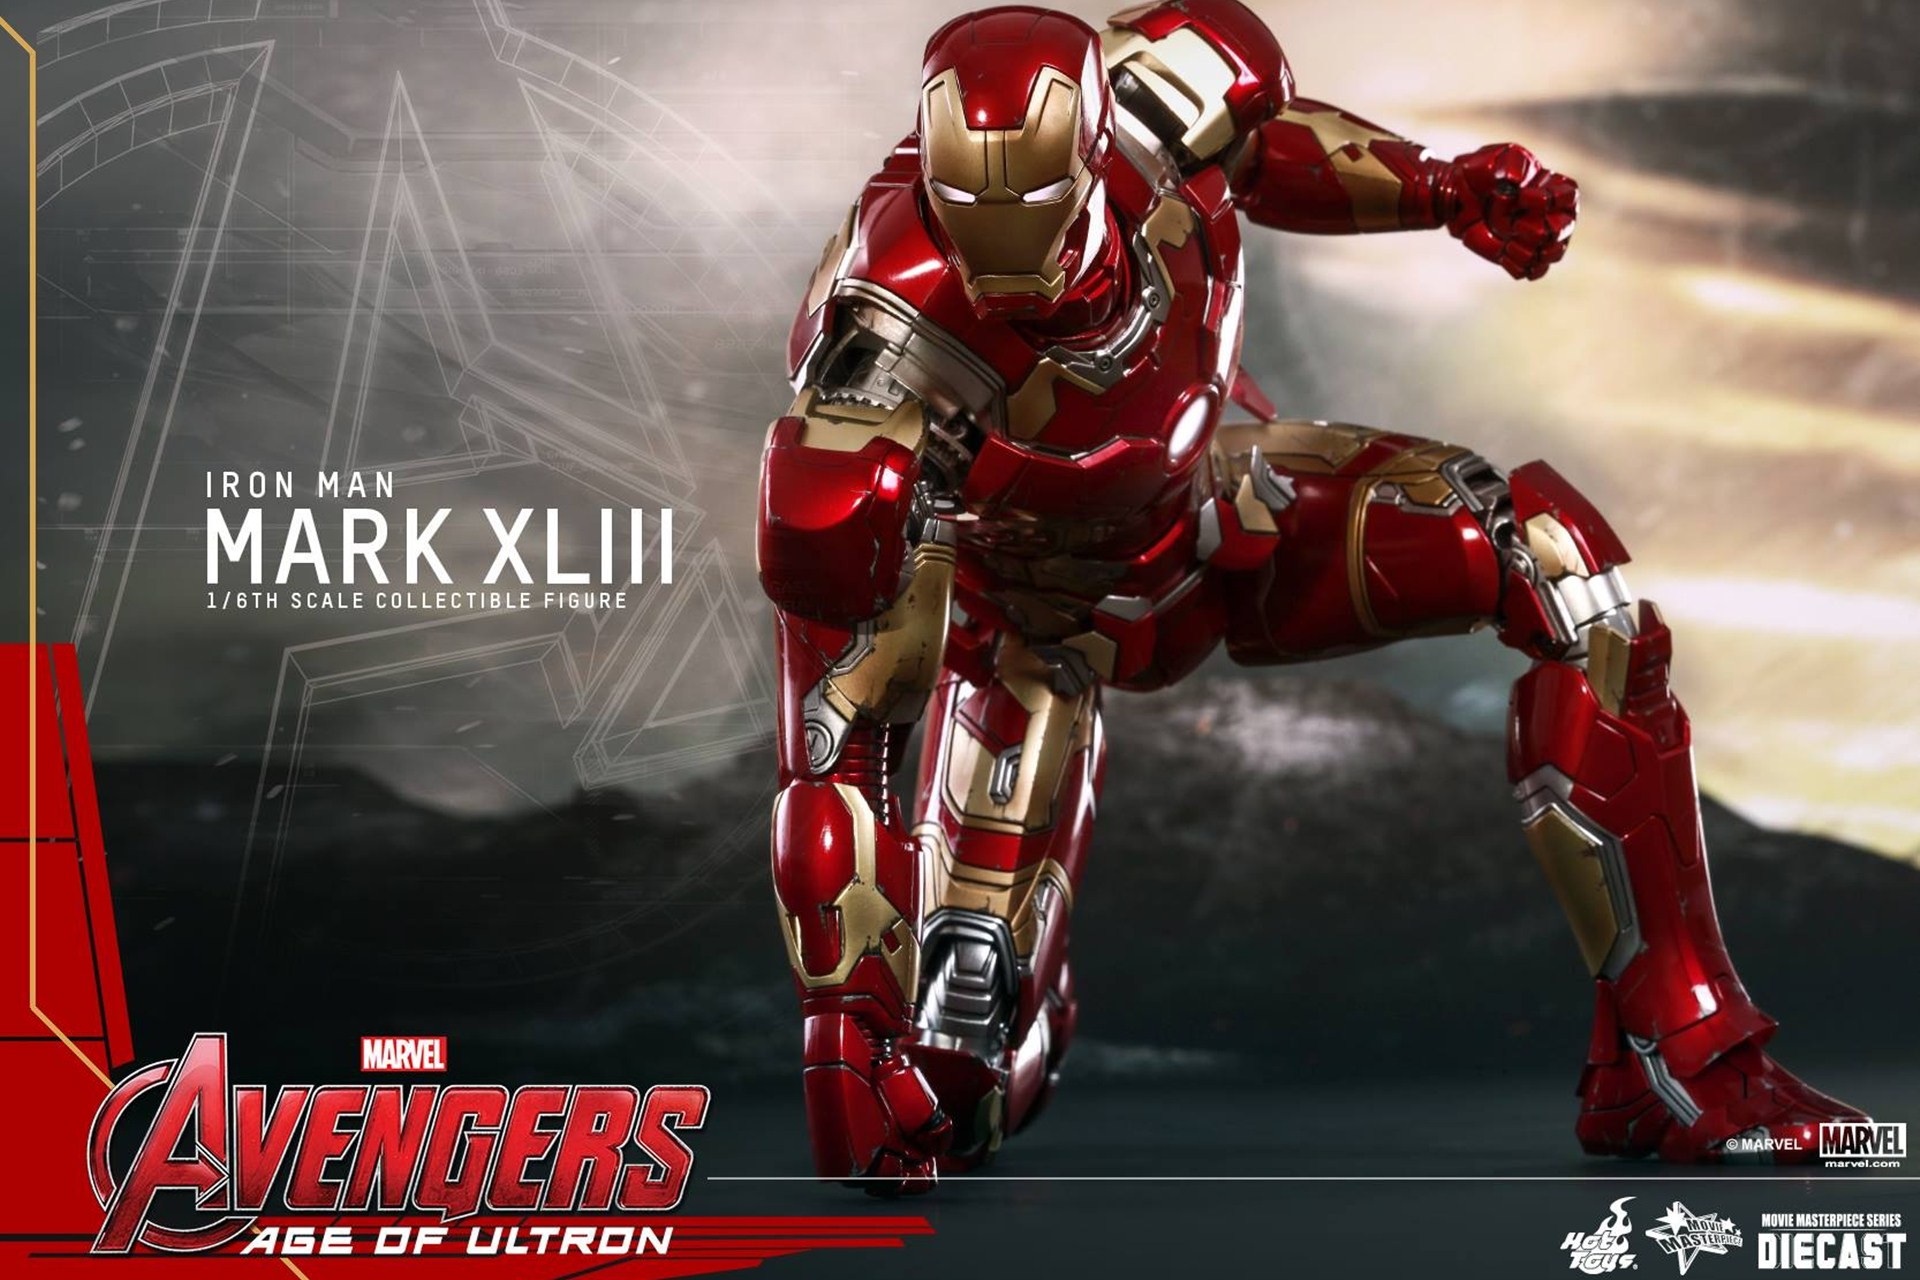 Download wallpaper hd 1080p free download for mobile - Iron Man In ...